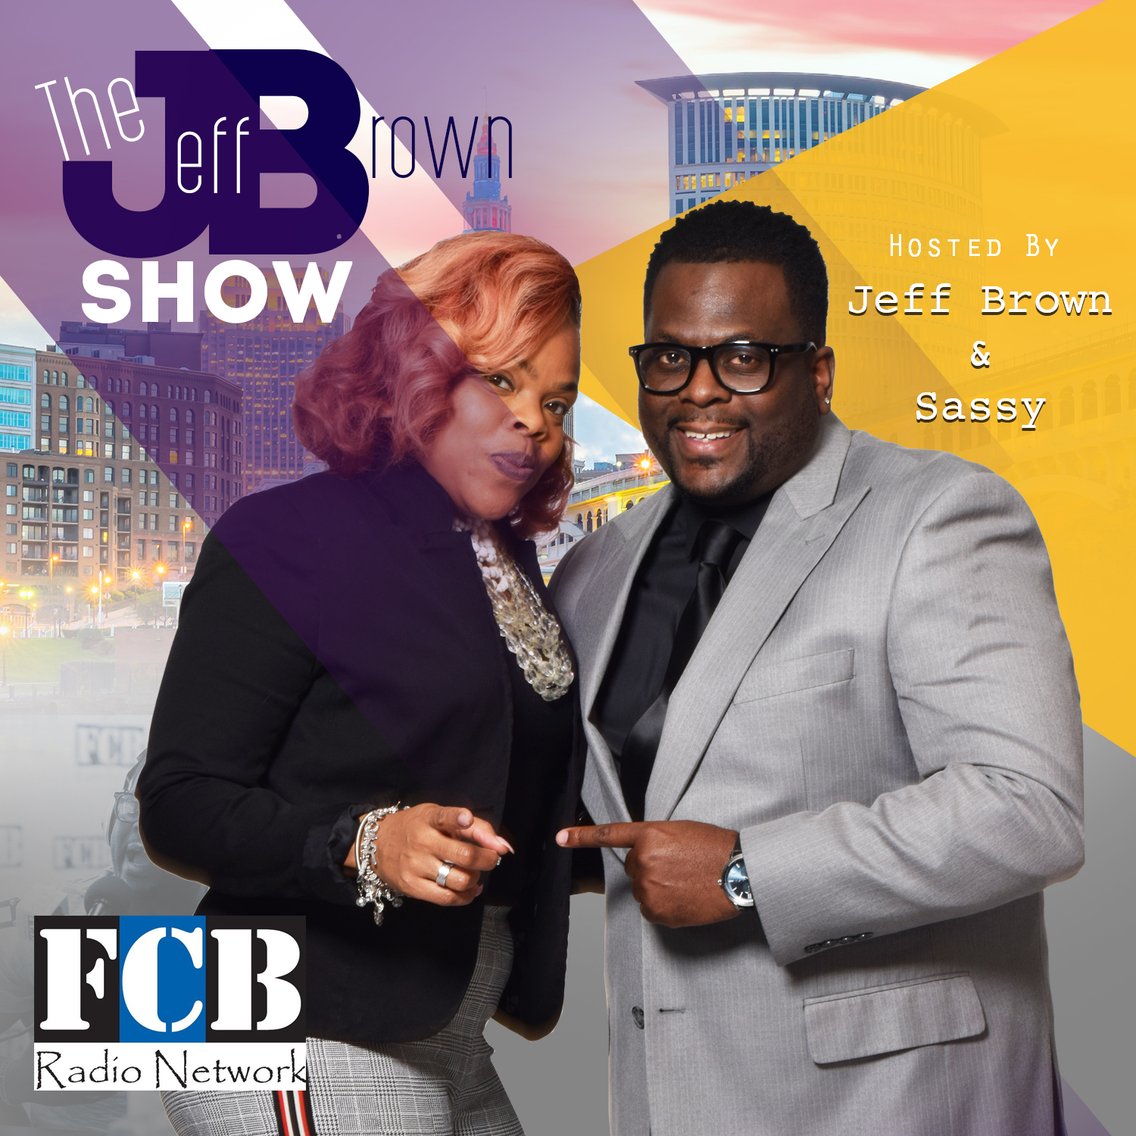 The Jeff Brown Show - Cover Image